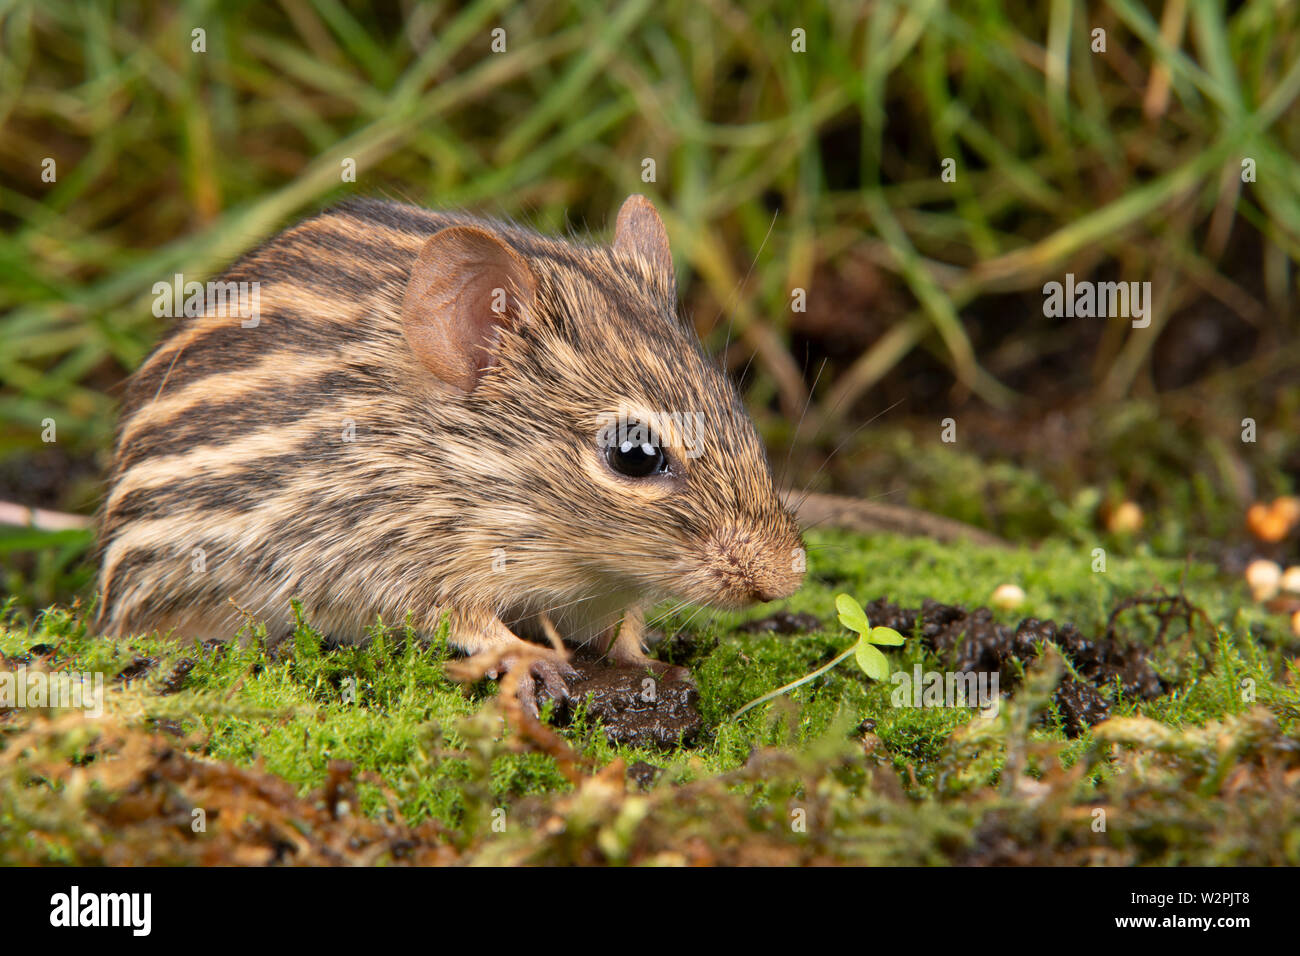 a wild Zebra mouse from the African Sahara region Stock Photo